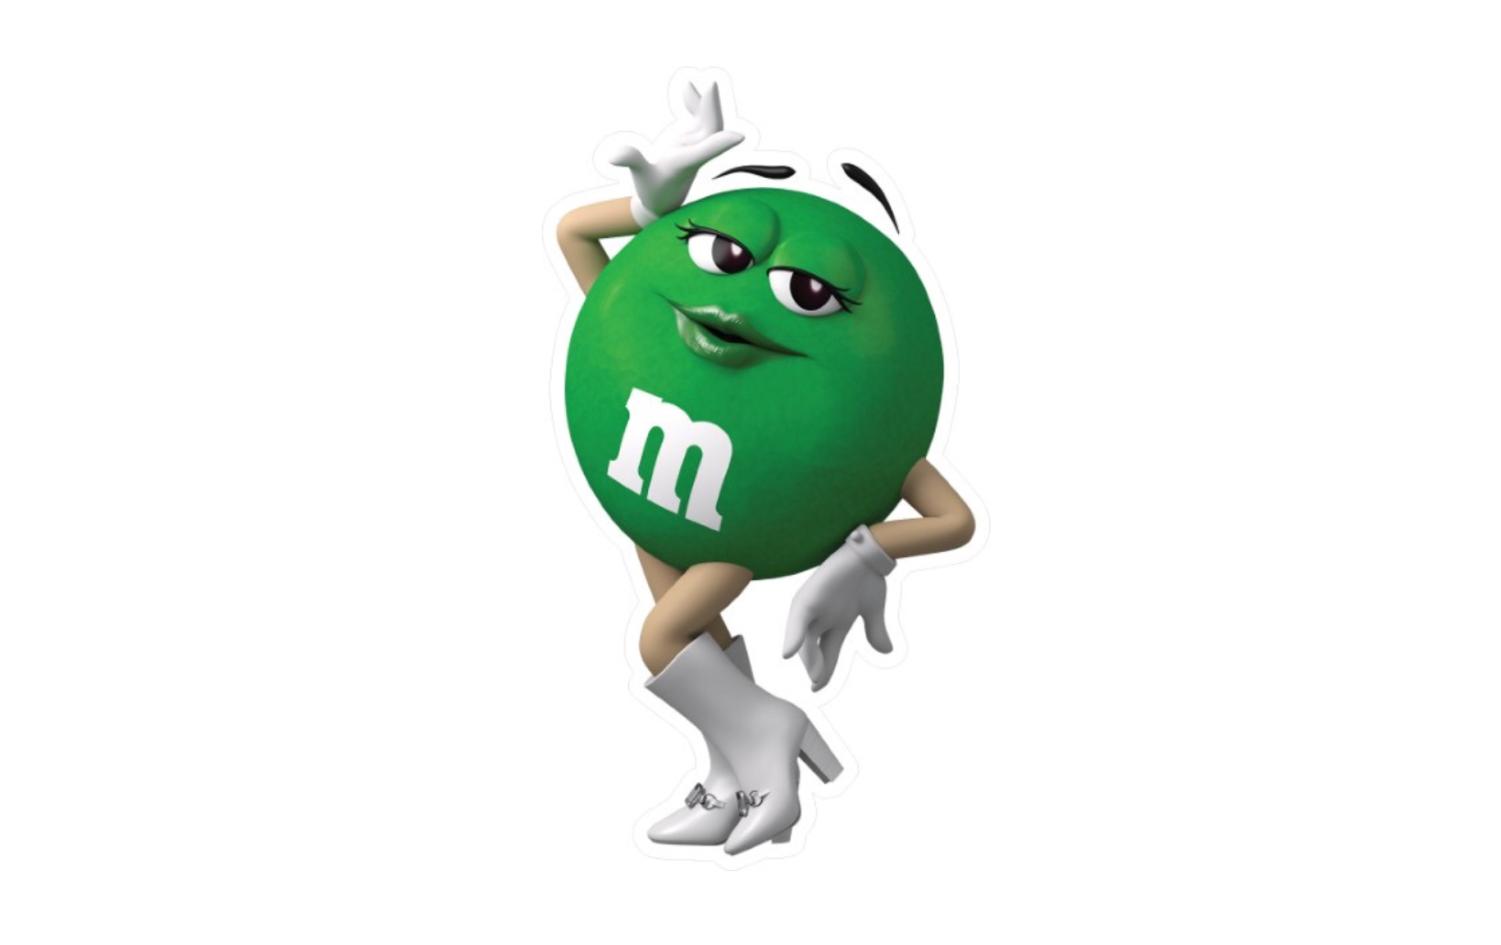 Hear conservative complaints about changes to M&M'S chocolate characters